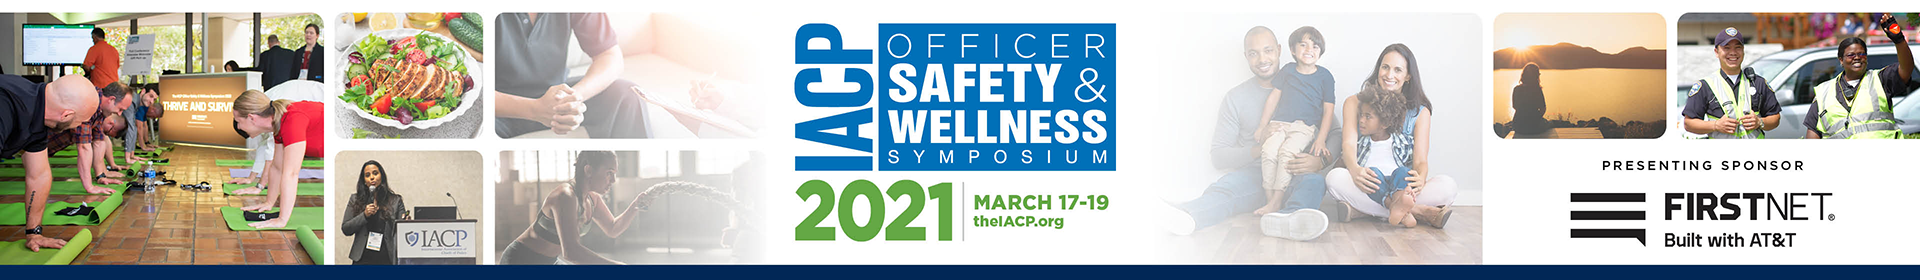 Officer Safety and Wellness Symposium 2021 Event Banner